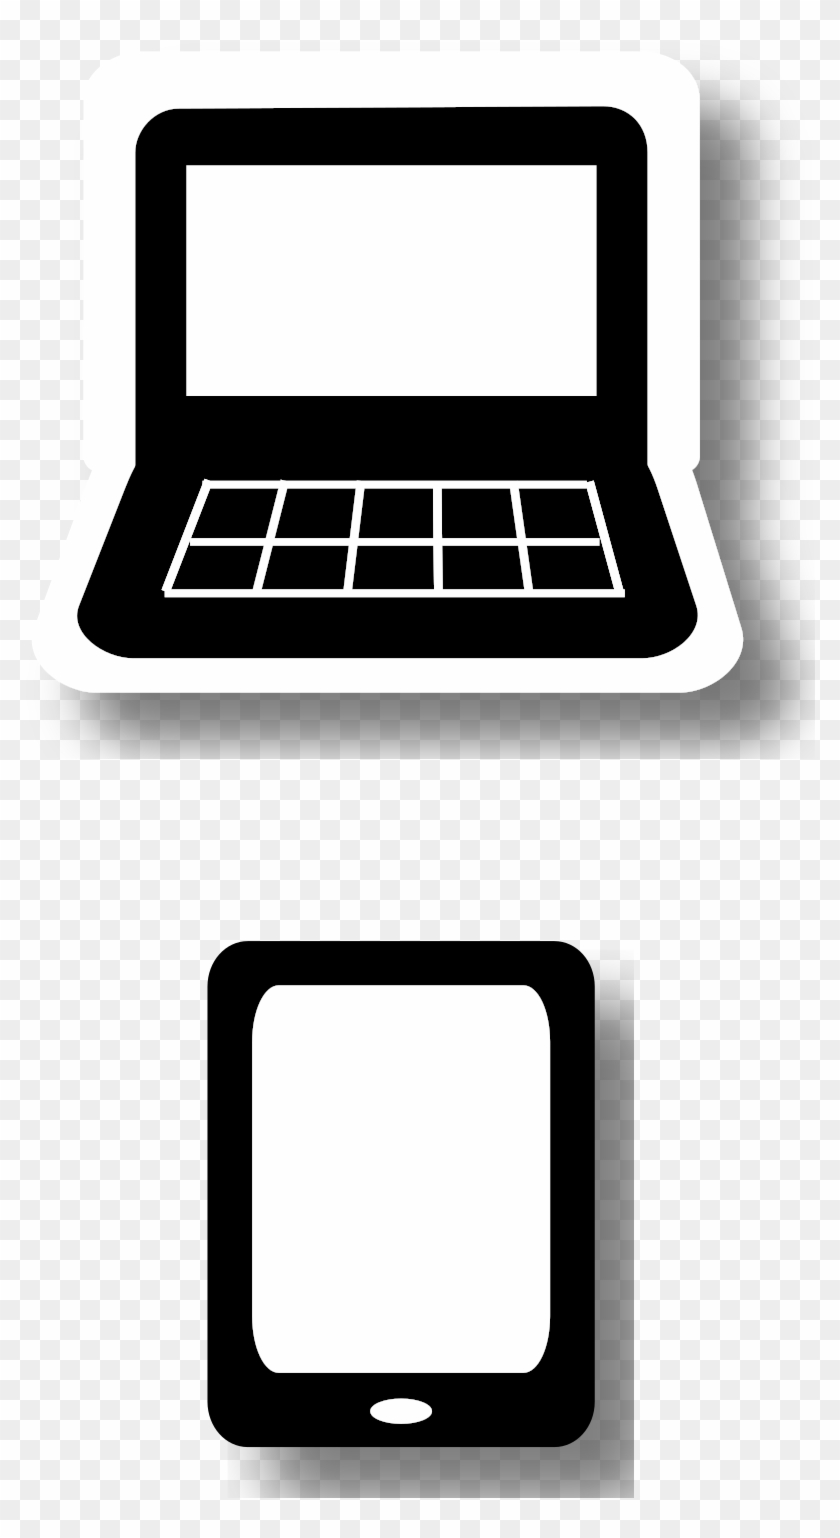 This Free Icons Png Design Of Laptop And Tablet - Smartphone #823063